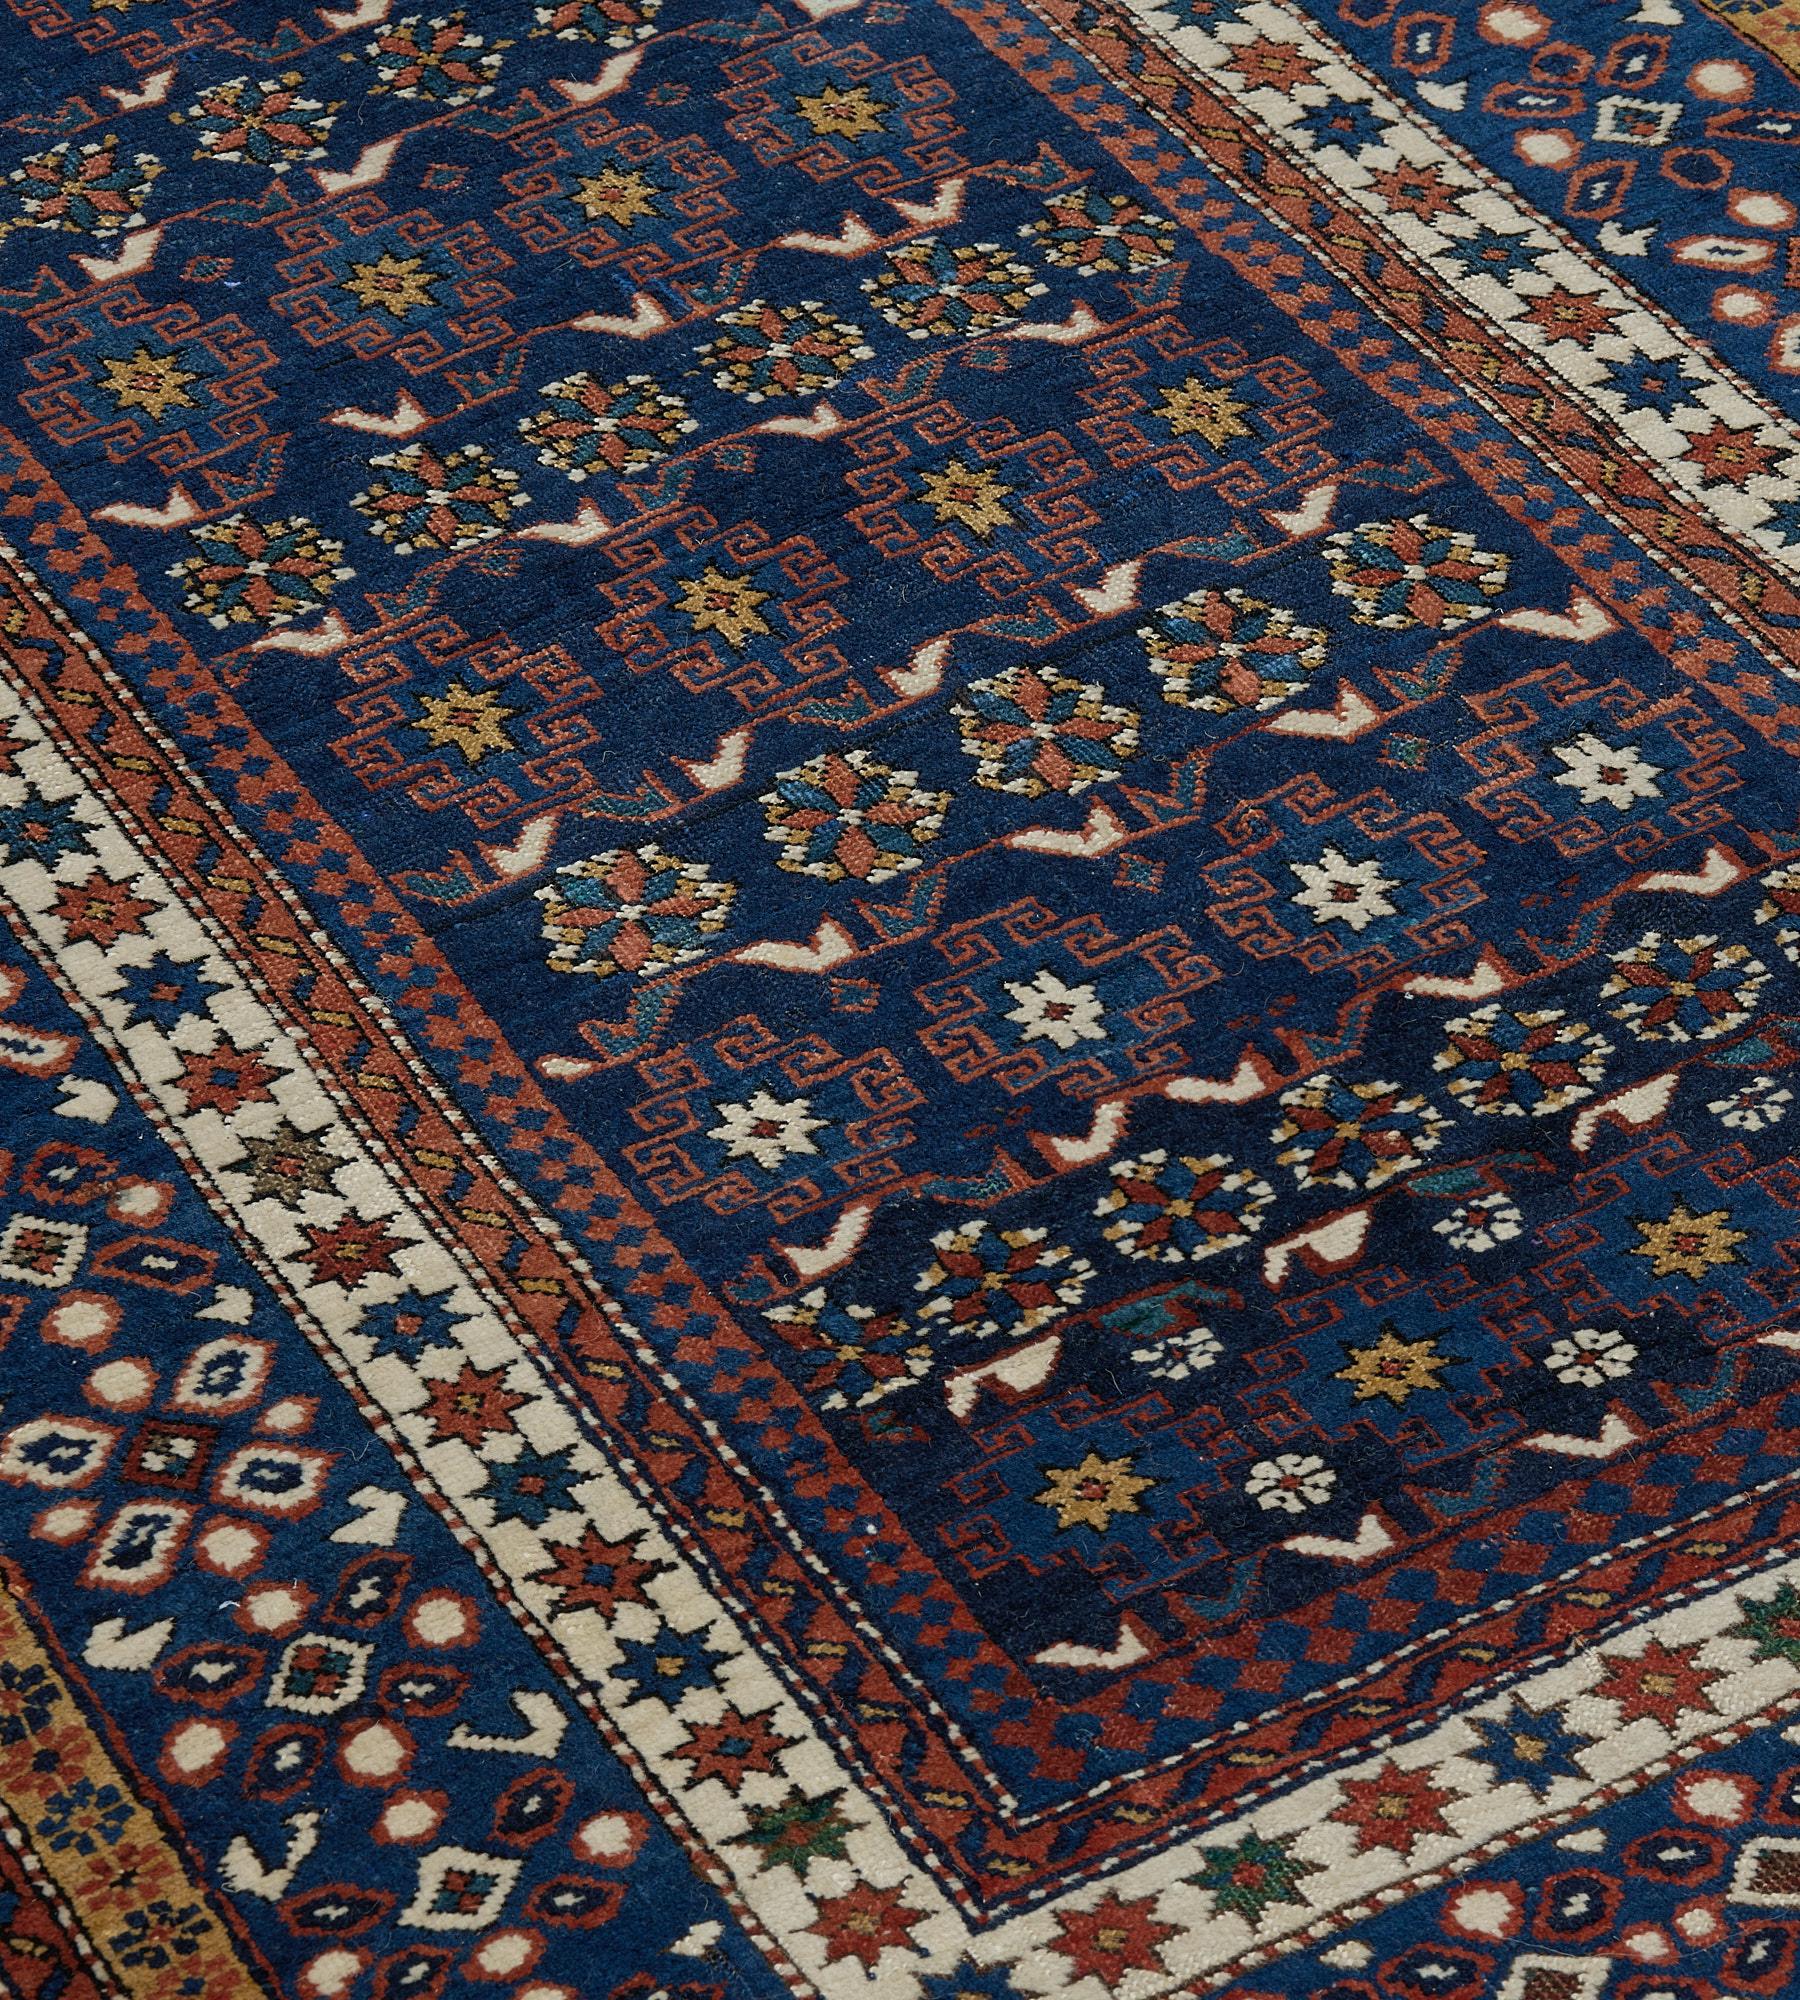 This antique, circa 1900, Chi-Chi rug has a shaded indigo-blue field with horizontal rows of light blue hooked linked lozenges between angular polychrome rosettes enclosed within a blue and terracotta-red reciprocal skittle-pattern stripe, in a